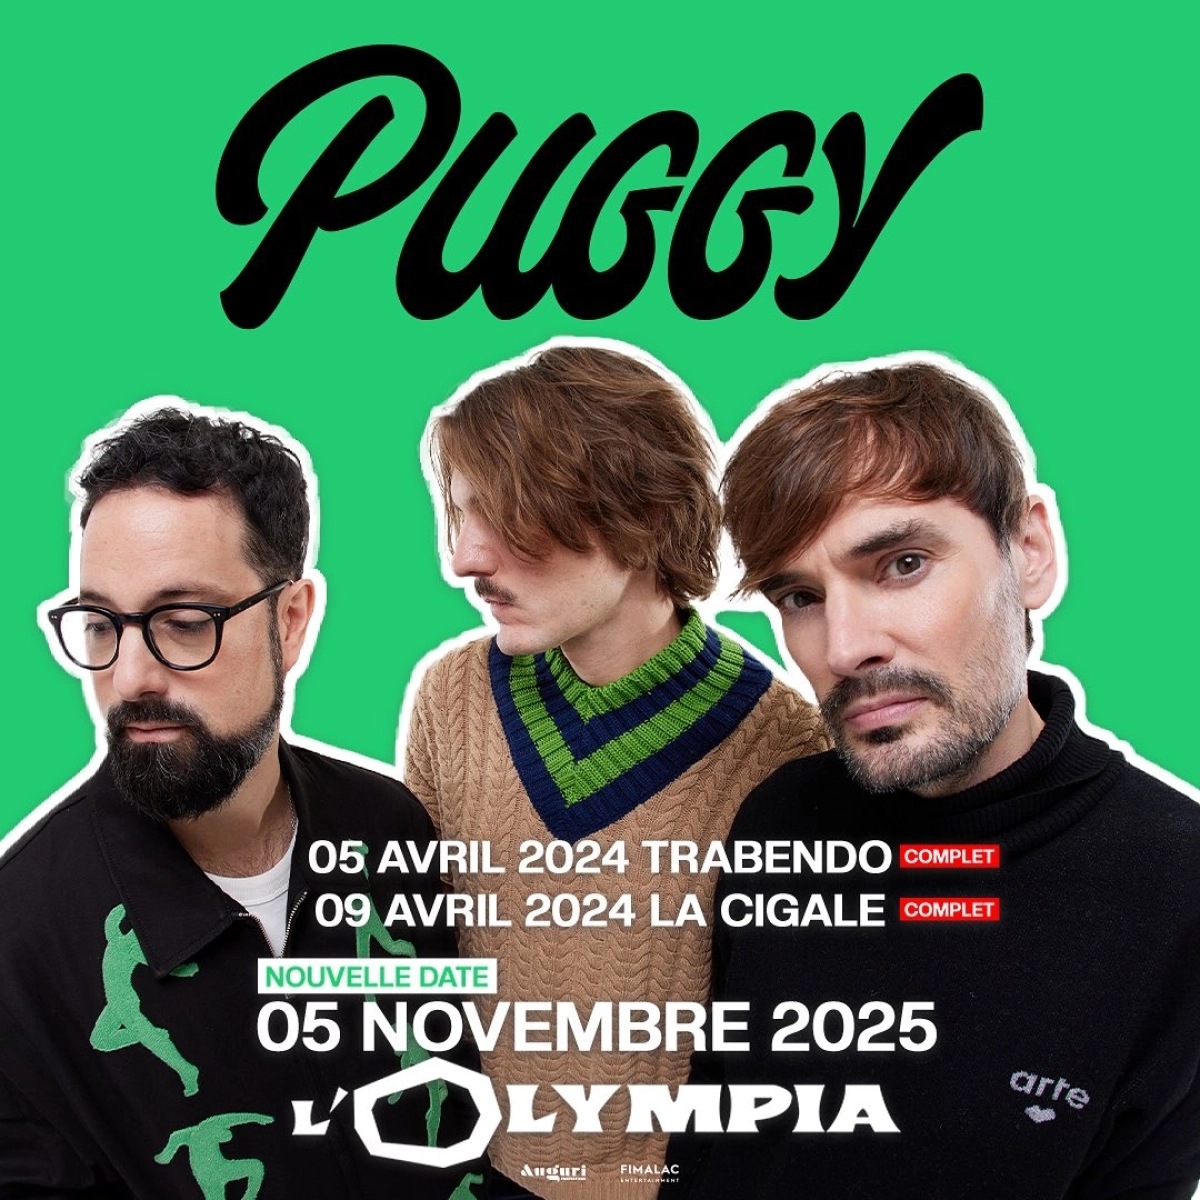 Puggy in der Olympia Tickets